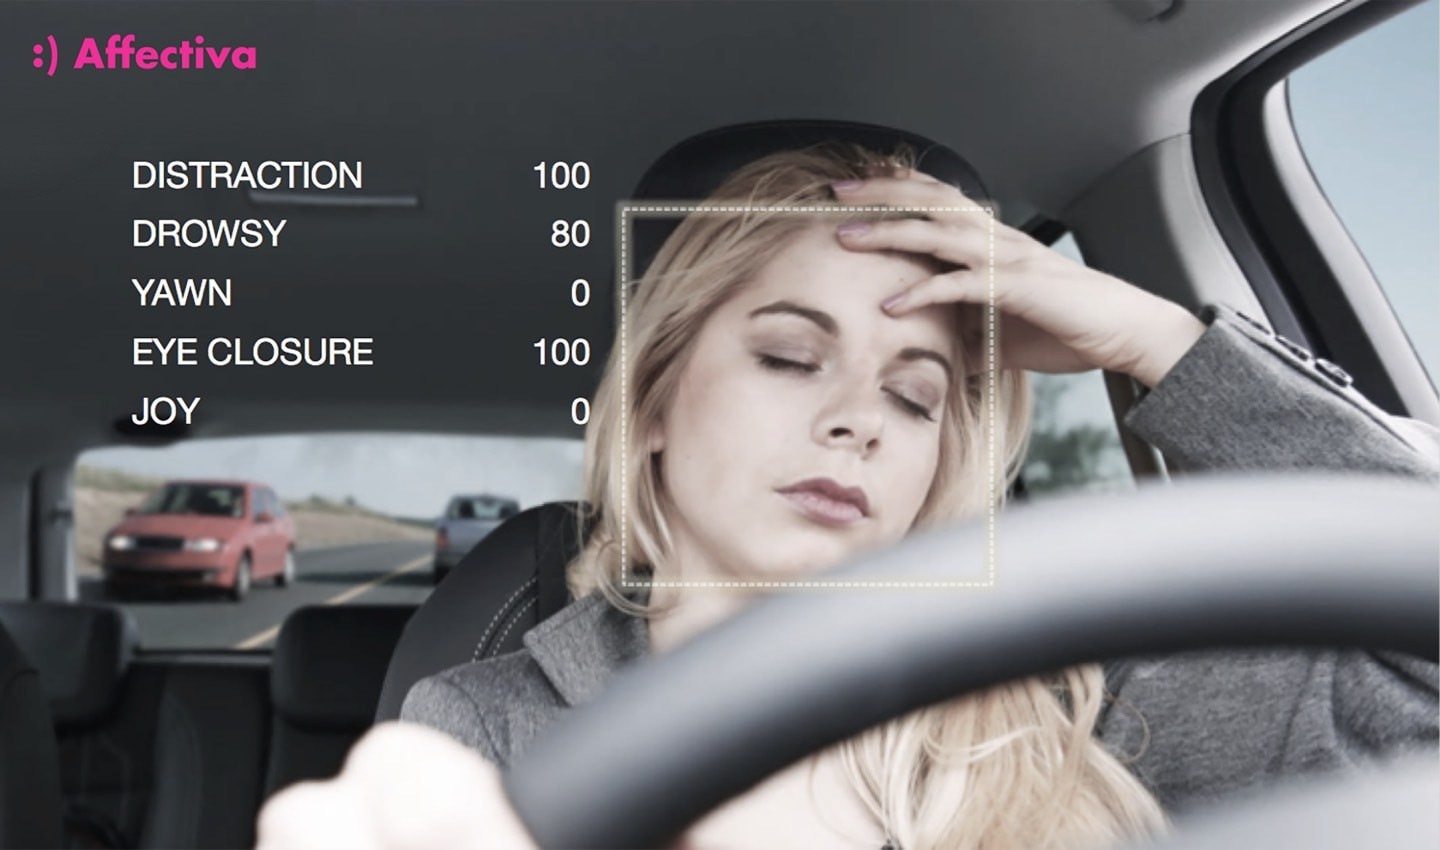 Affectiva detecting driver drowsiness